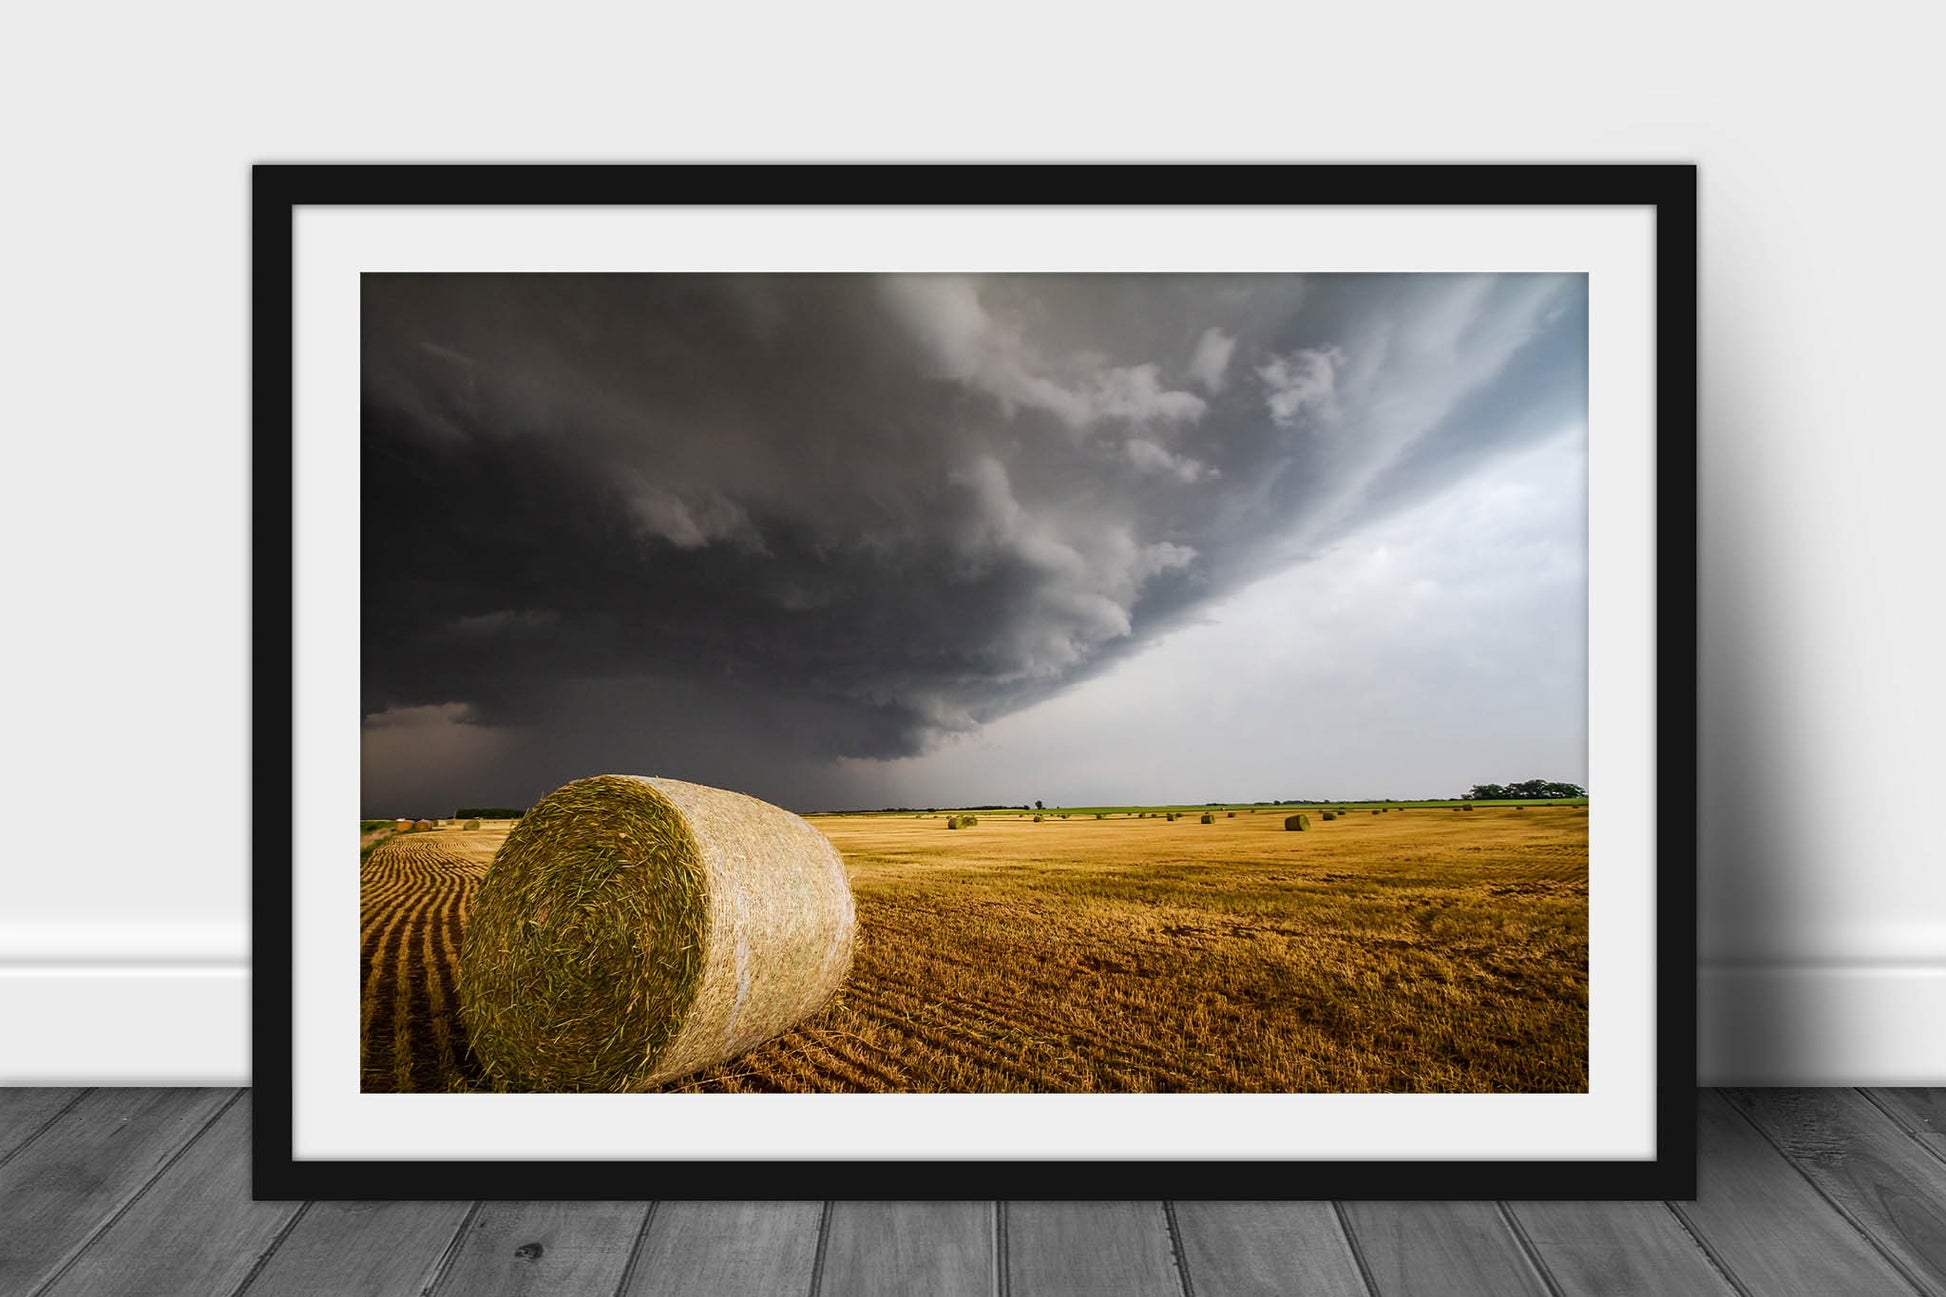 Framed country print with optional mat of a storm advancing over a golden round hay bale on a stormy spring day in Kansas by Sean Ramsey of Southern Plains Photography.